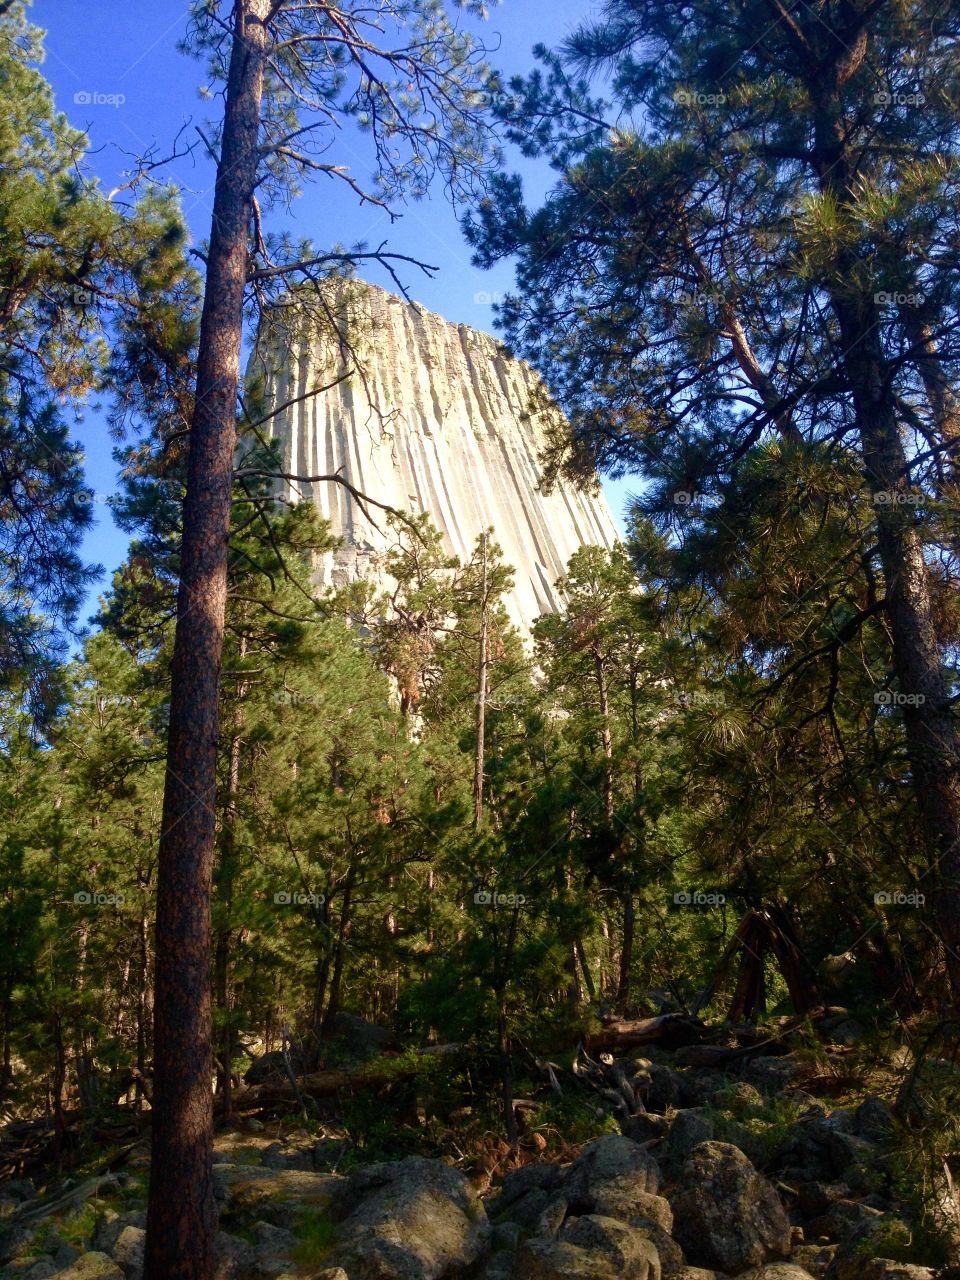 Wyoming Devils tower. National monument in Wyoming